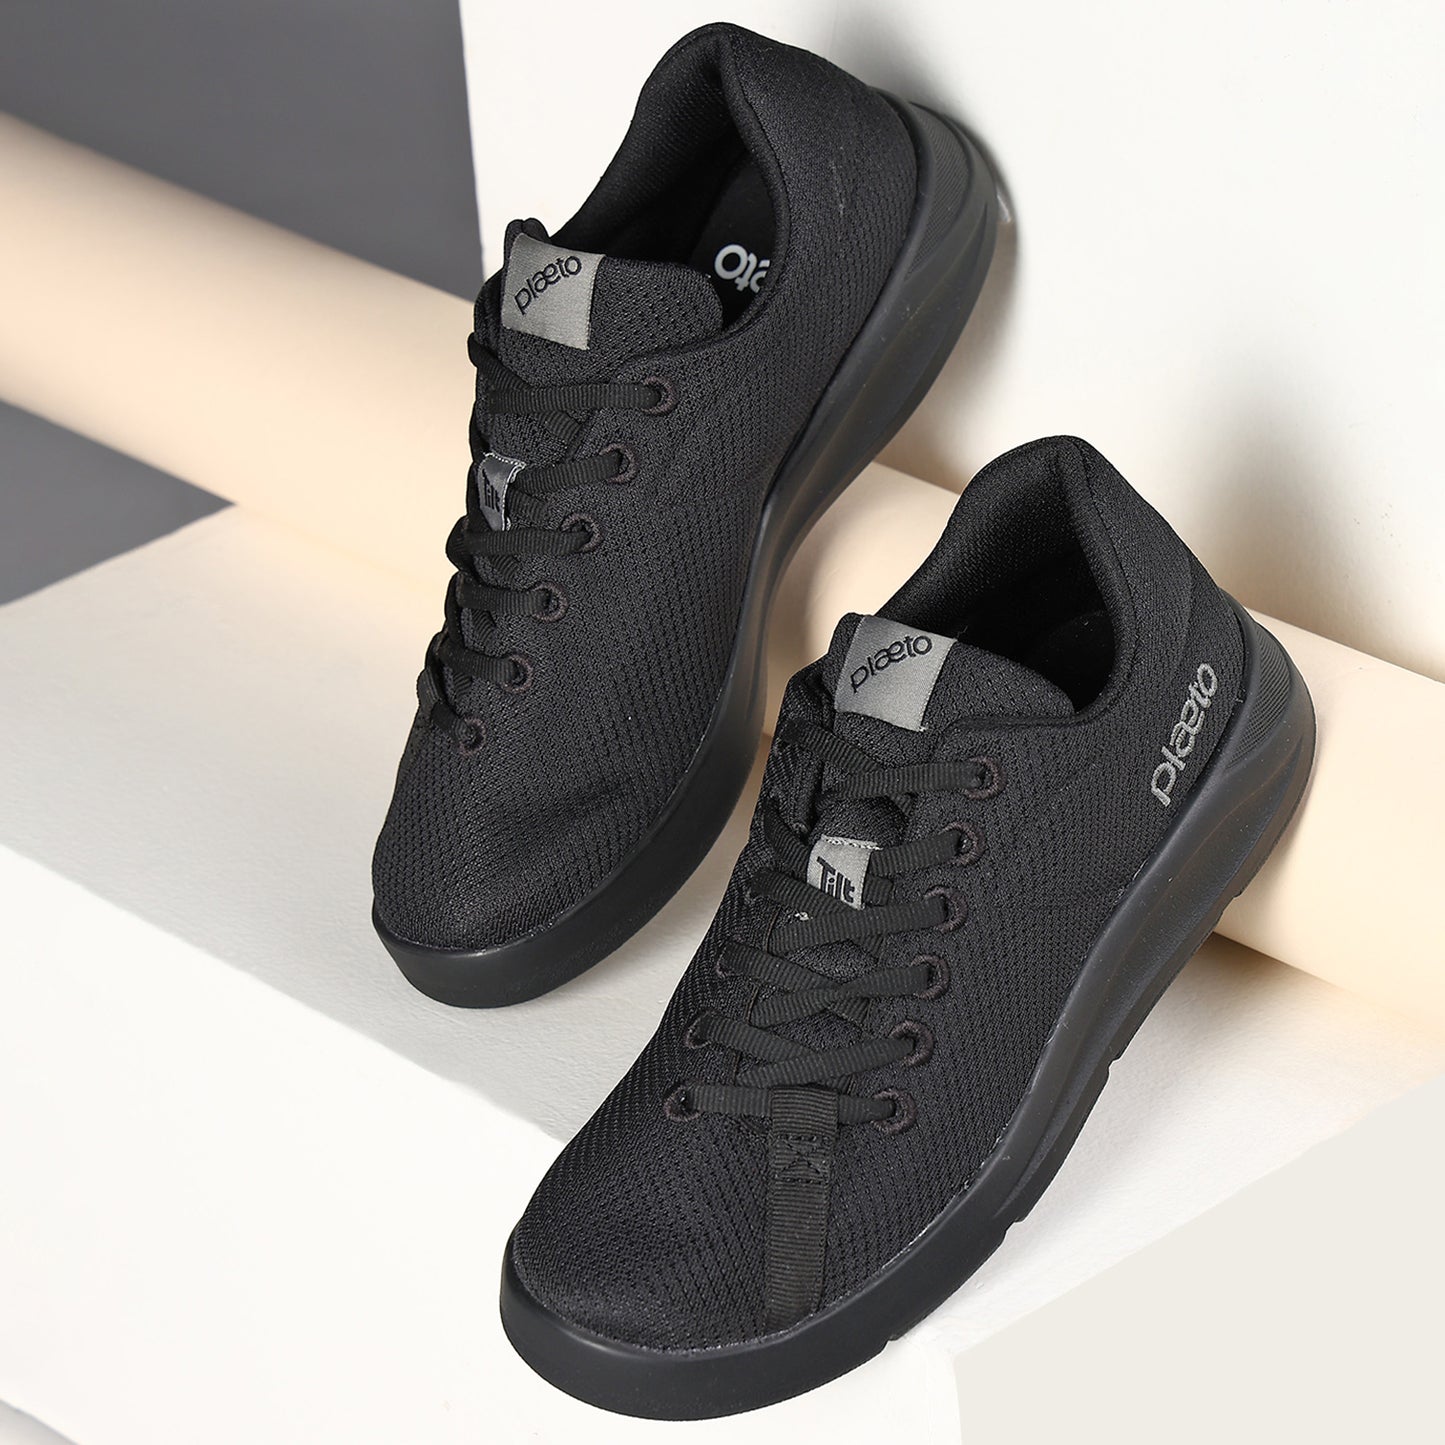 Casual Everyday Air Mesh Sneakers for Women - Classic Black